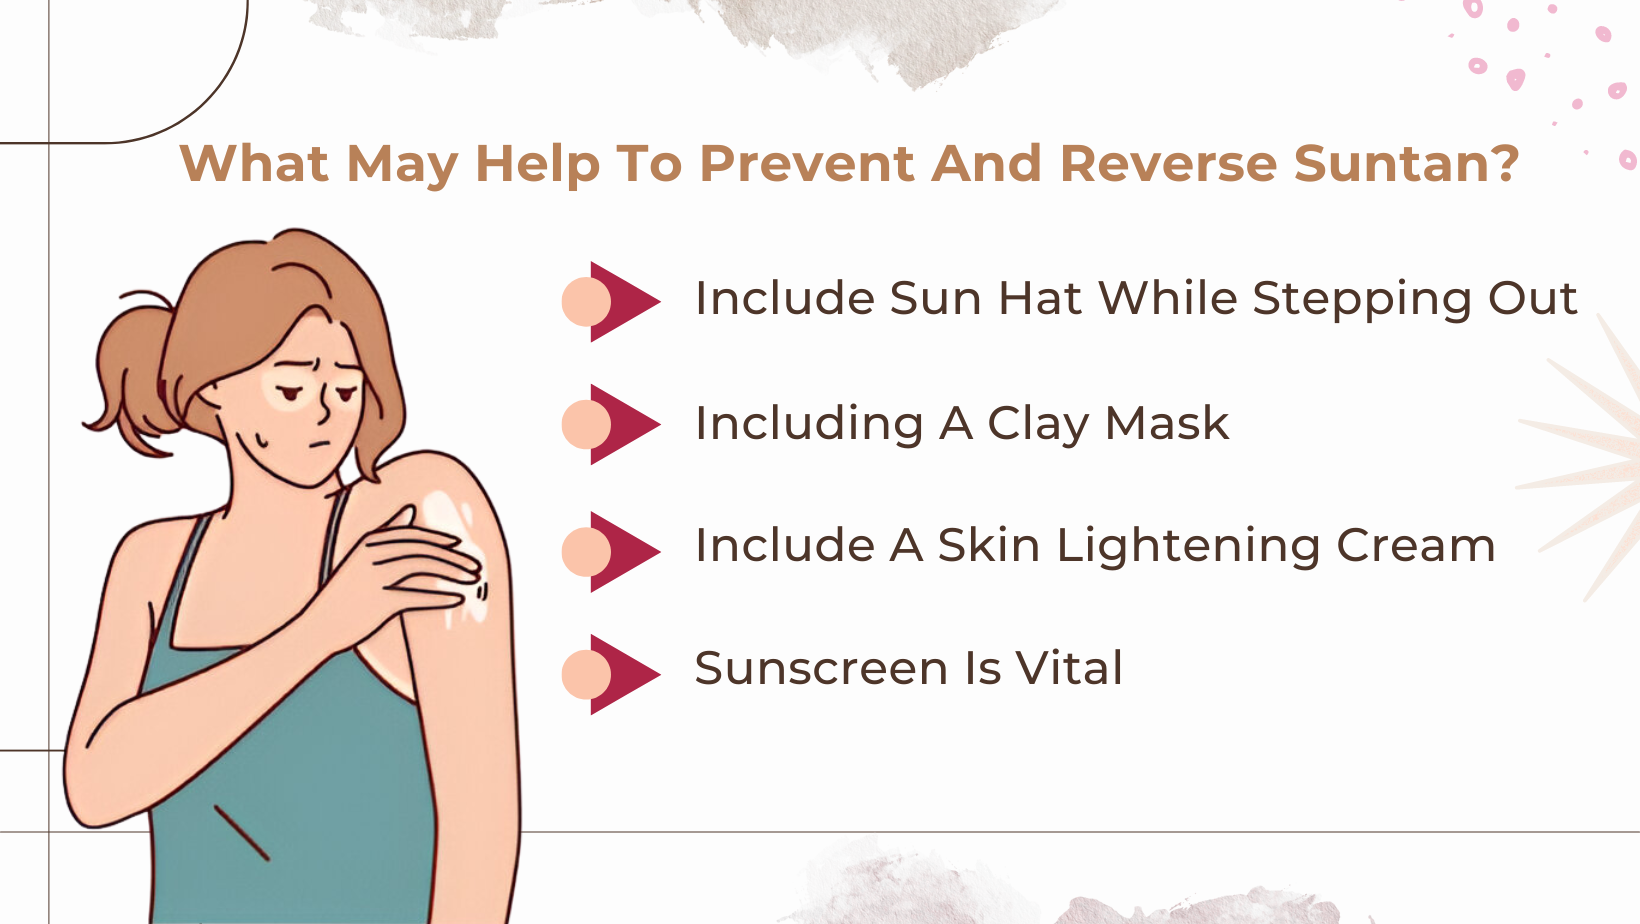 What May Help To Prevent And Reverse Suntan?